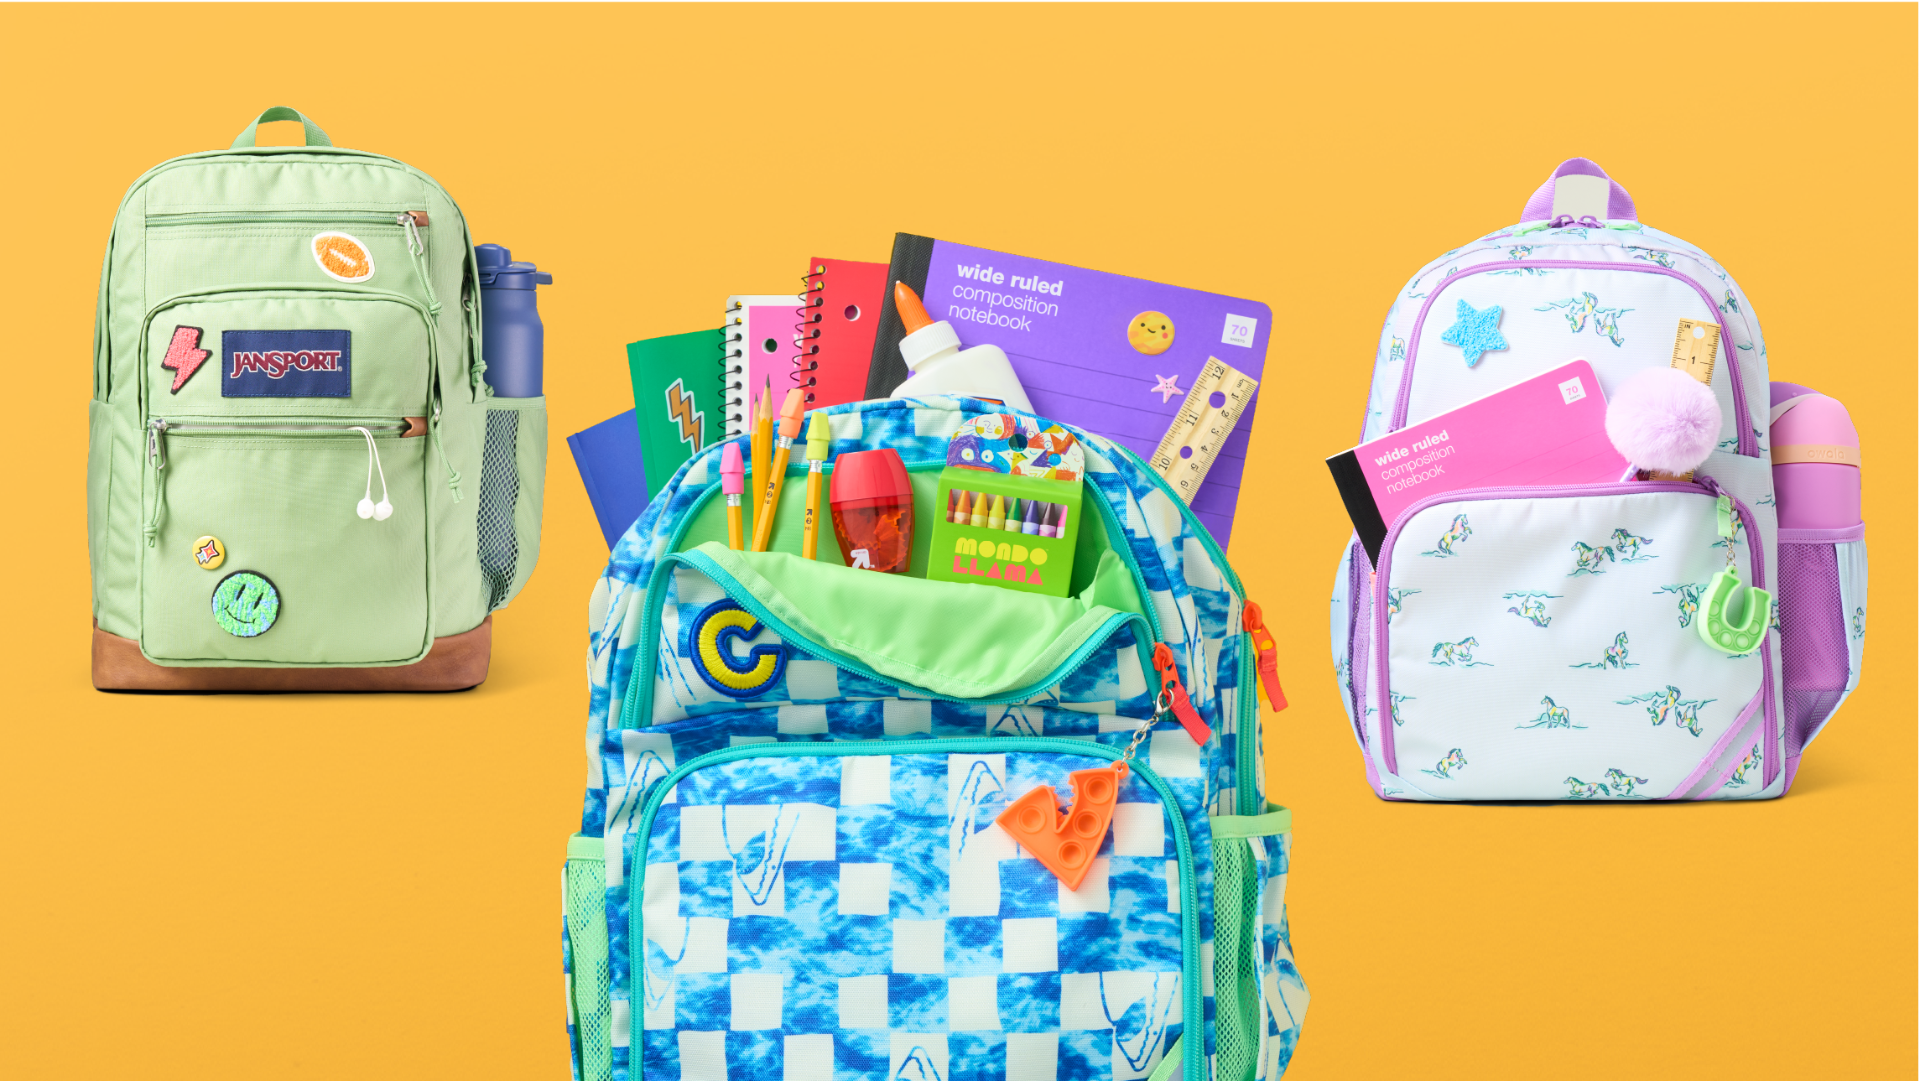 Three personalized backpacks filled with school supplies.